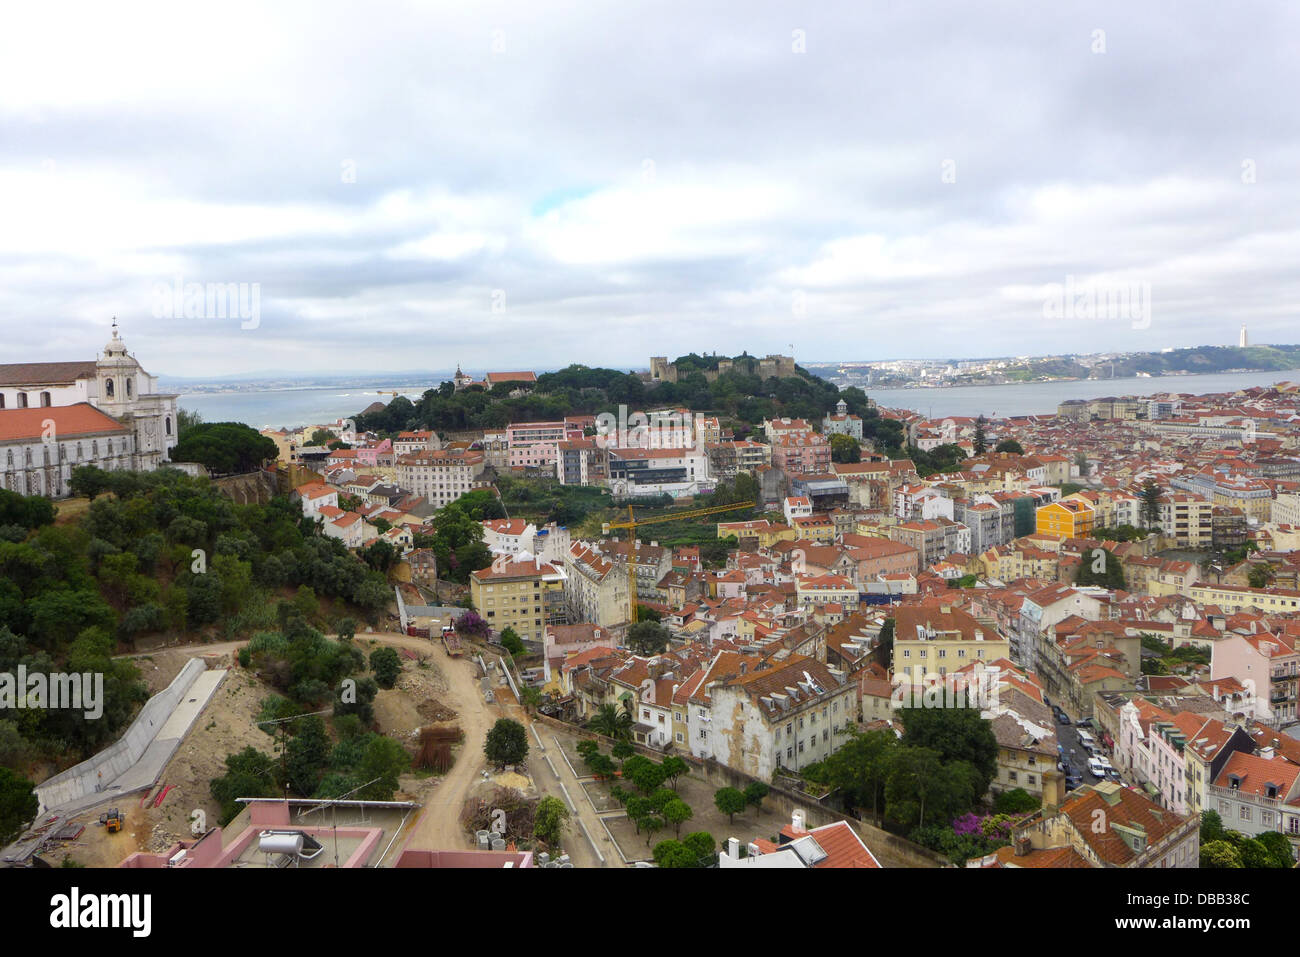 A panoramic view of Lisbon showing the Graca Convent  left, the Saint George castle center, and the Baixa district right. Stock Photo